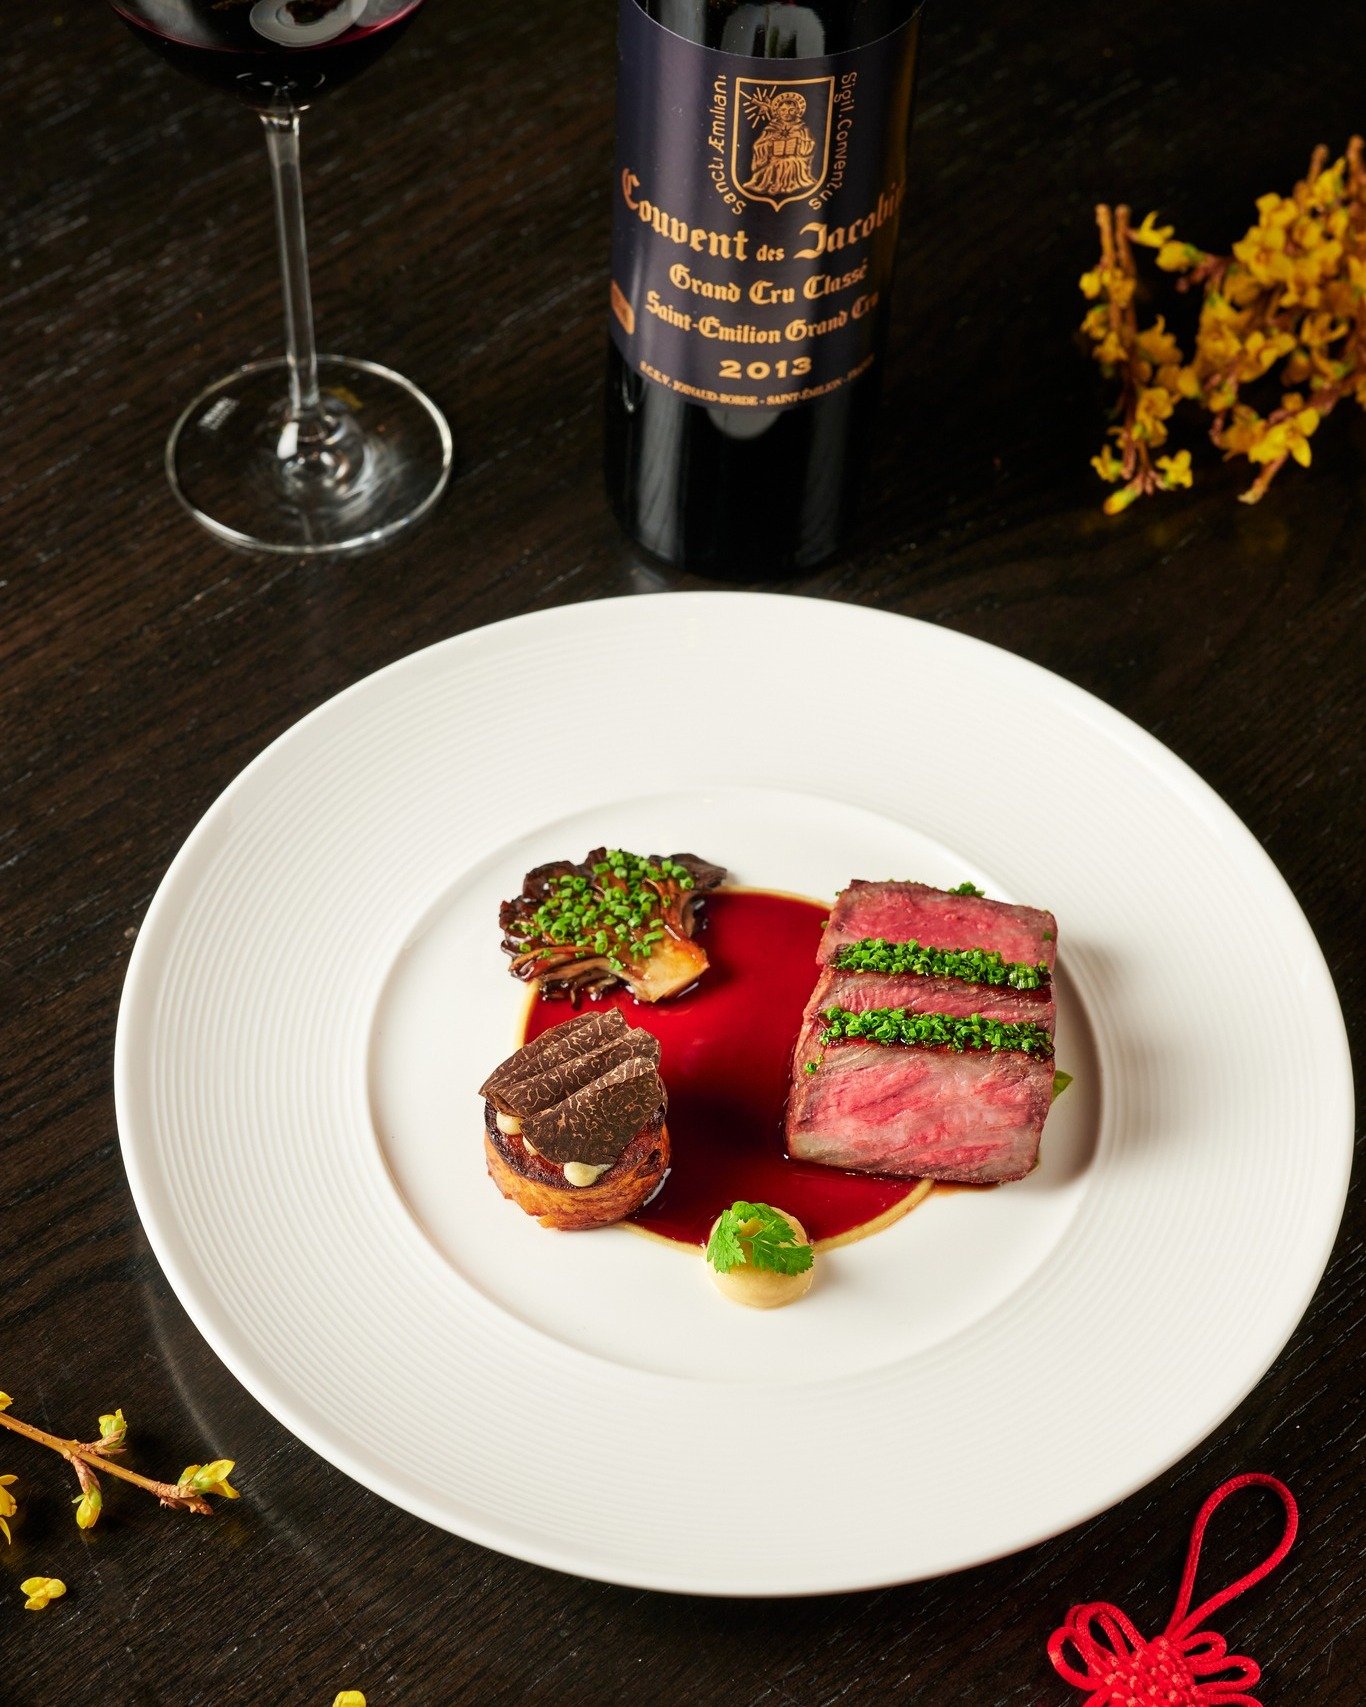 Welcome the Lunar New Year and savour perfection with the Wylarah Wagyu, its marbled richness complemented by the velvety notes of Couvent des Jacobins Saint-&Eacute;milion 2013 at SKAI.

View our menus and make your reservations via the link in our 